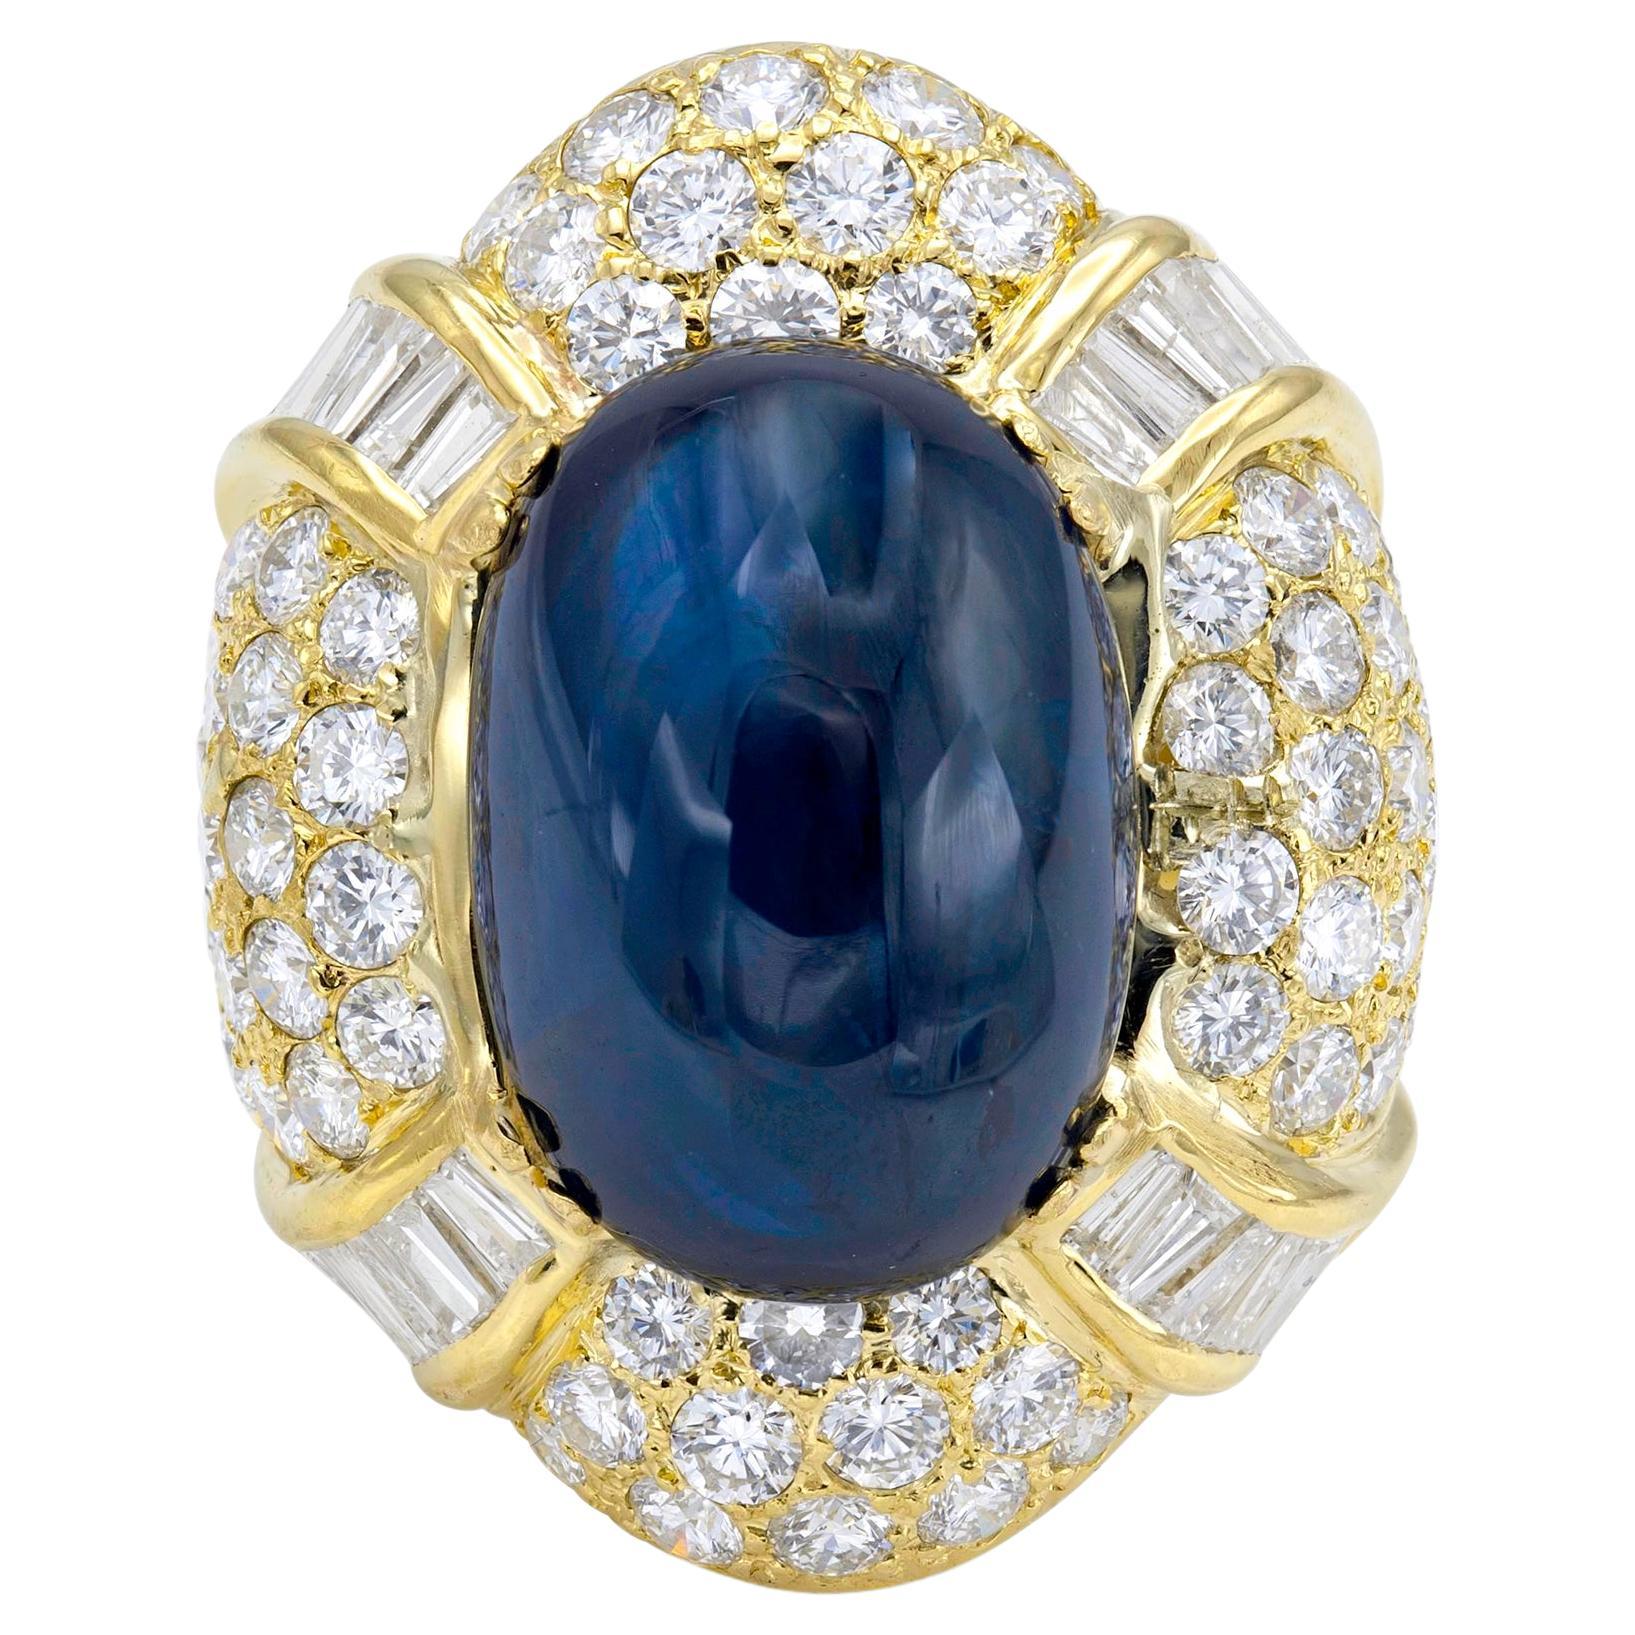 22.79 Carat Cabochon Sapphire Cocktail Ring with Diamonds For Sale